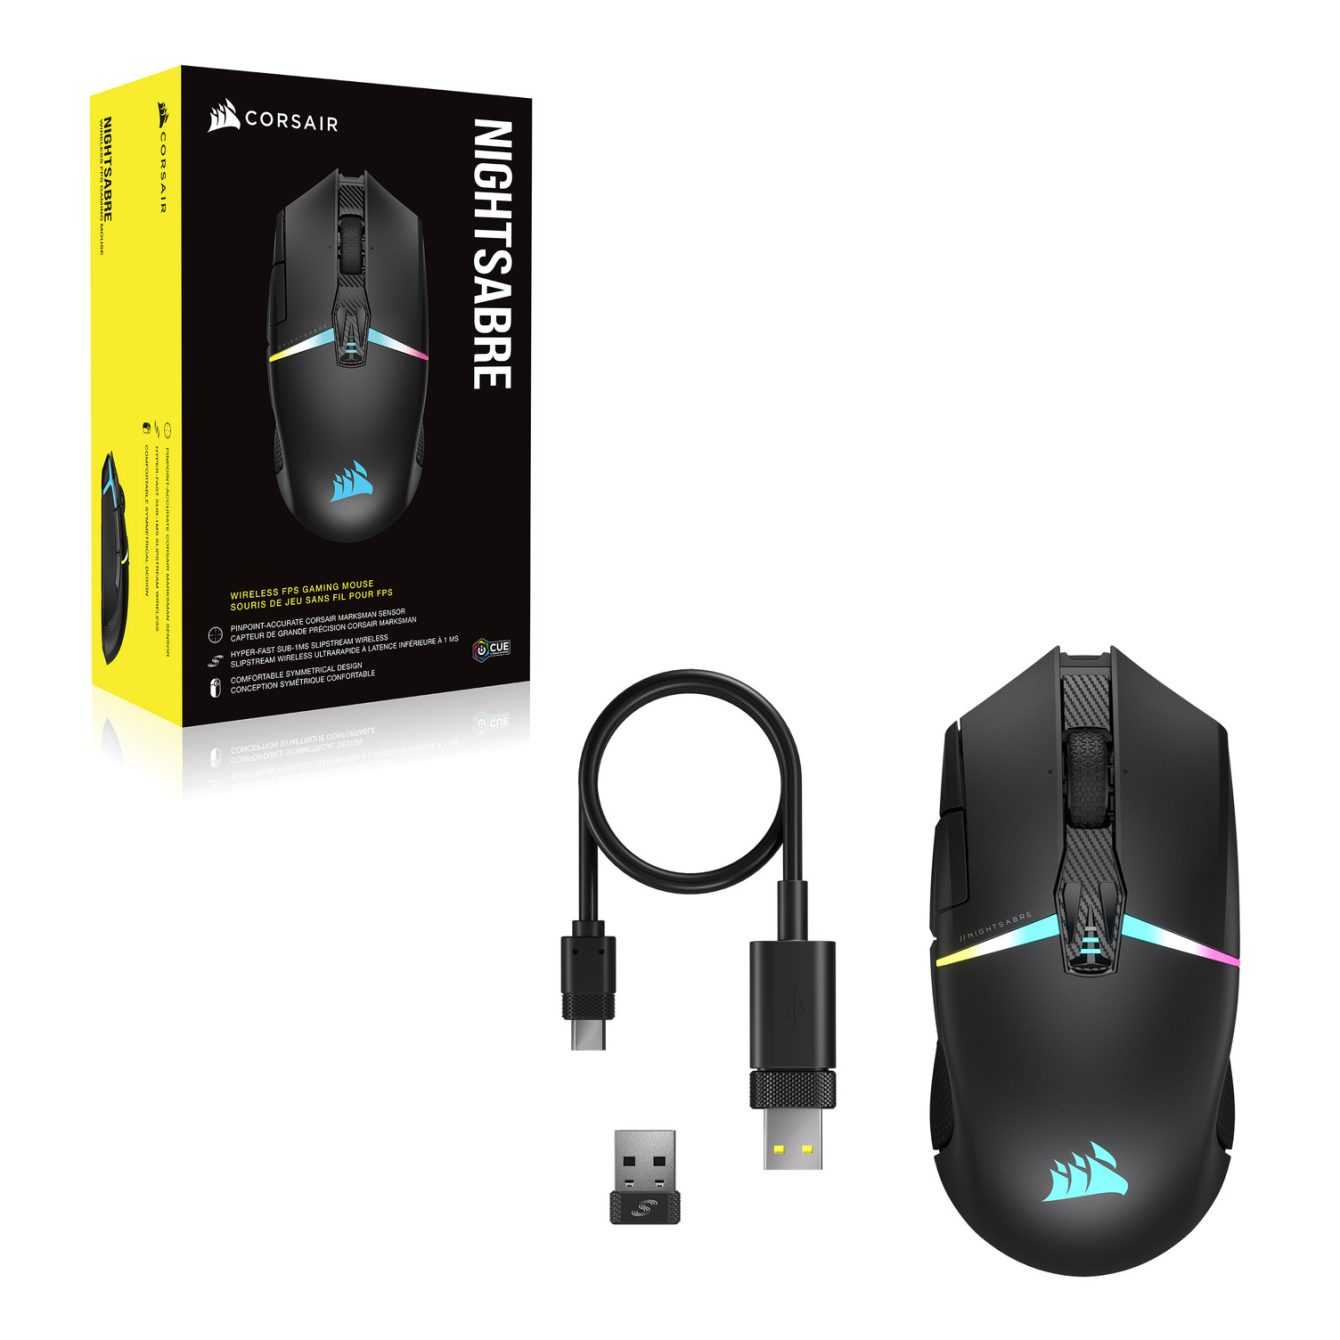 Corsair Nightsabre Wireless review: A mouse built to win